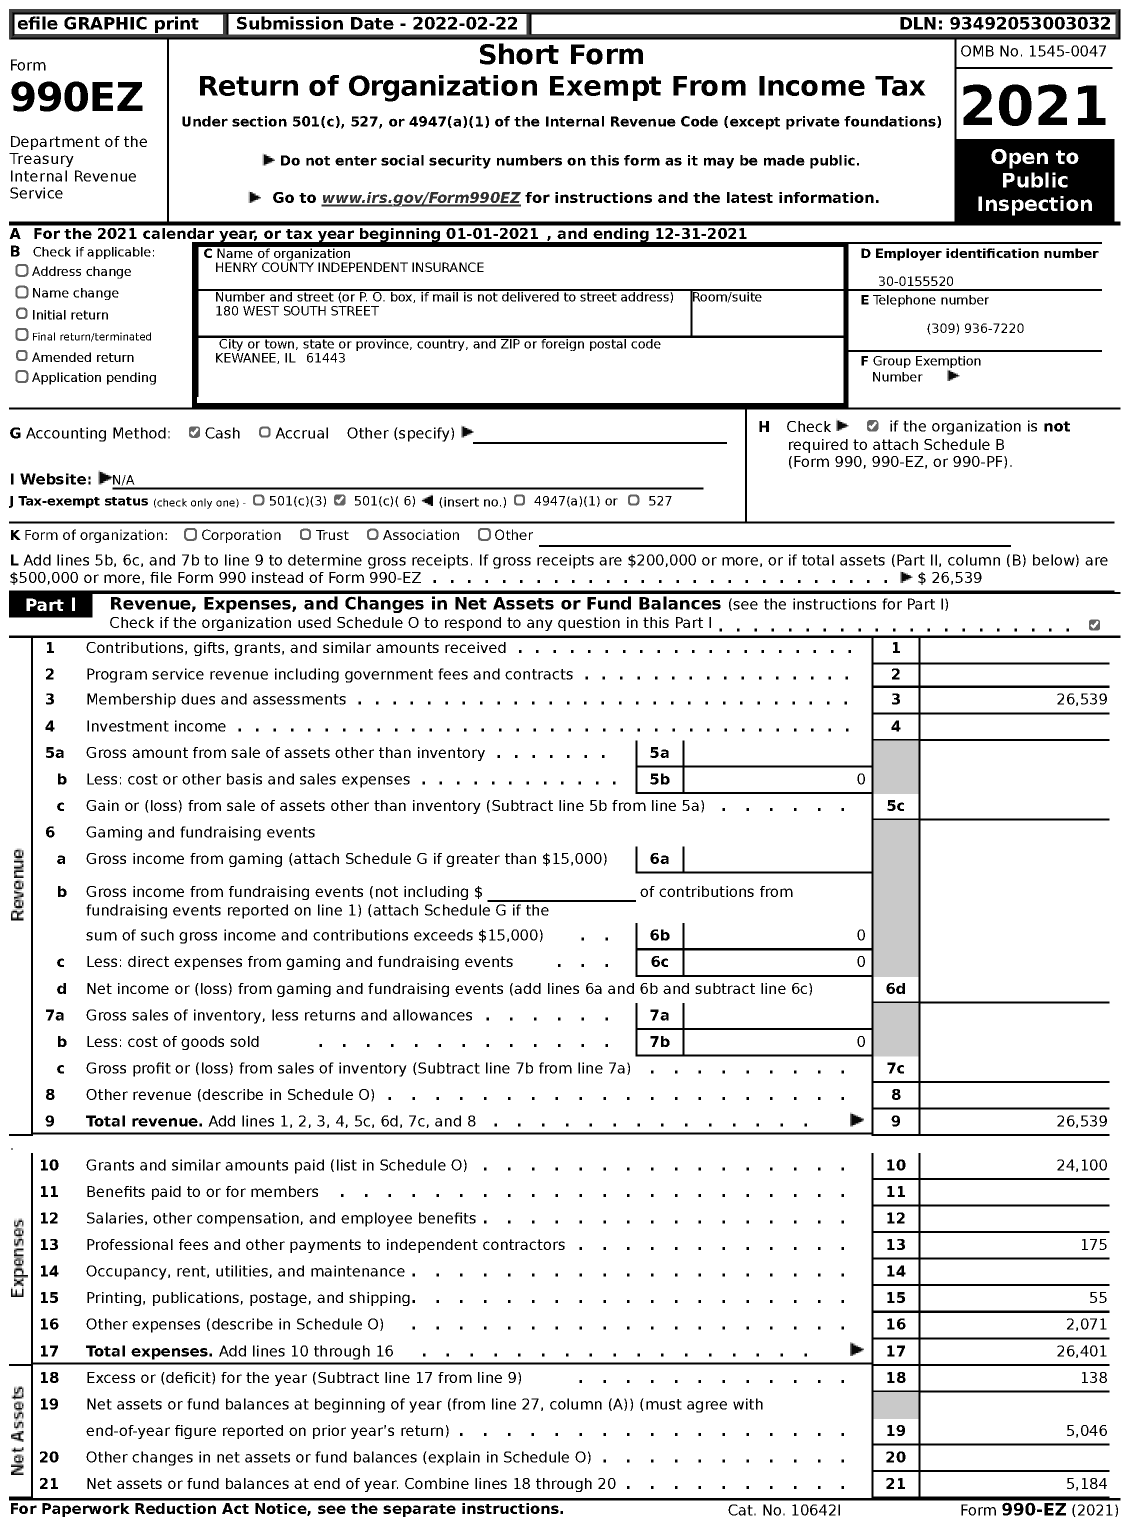 Image of first page of 2021 Form 990EZ for Henry County Independent Insurance